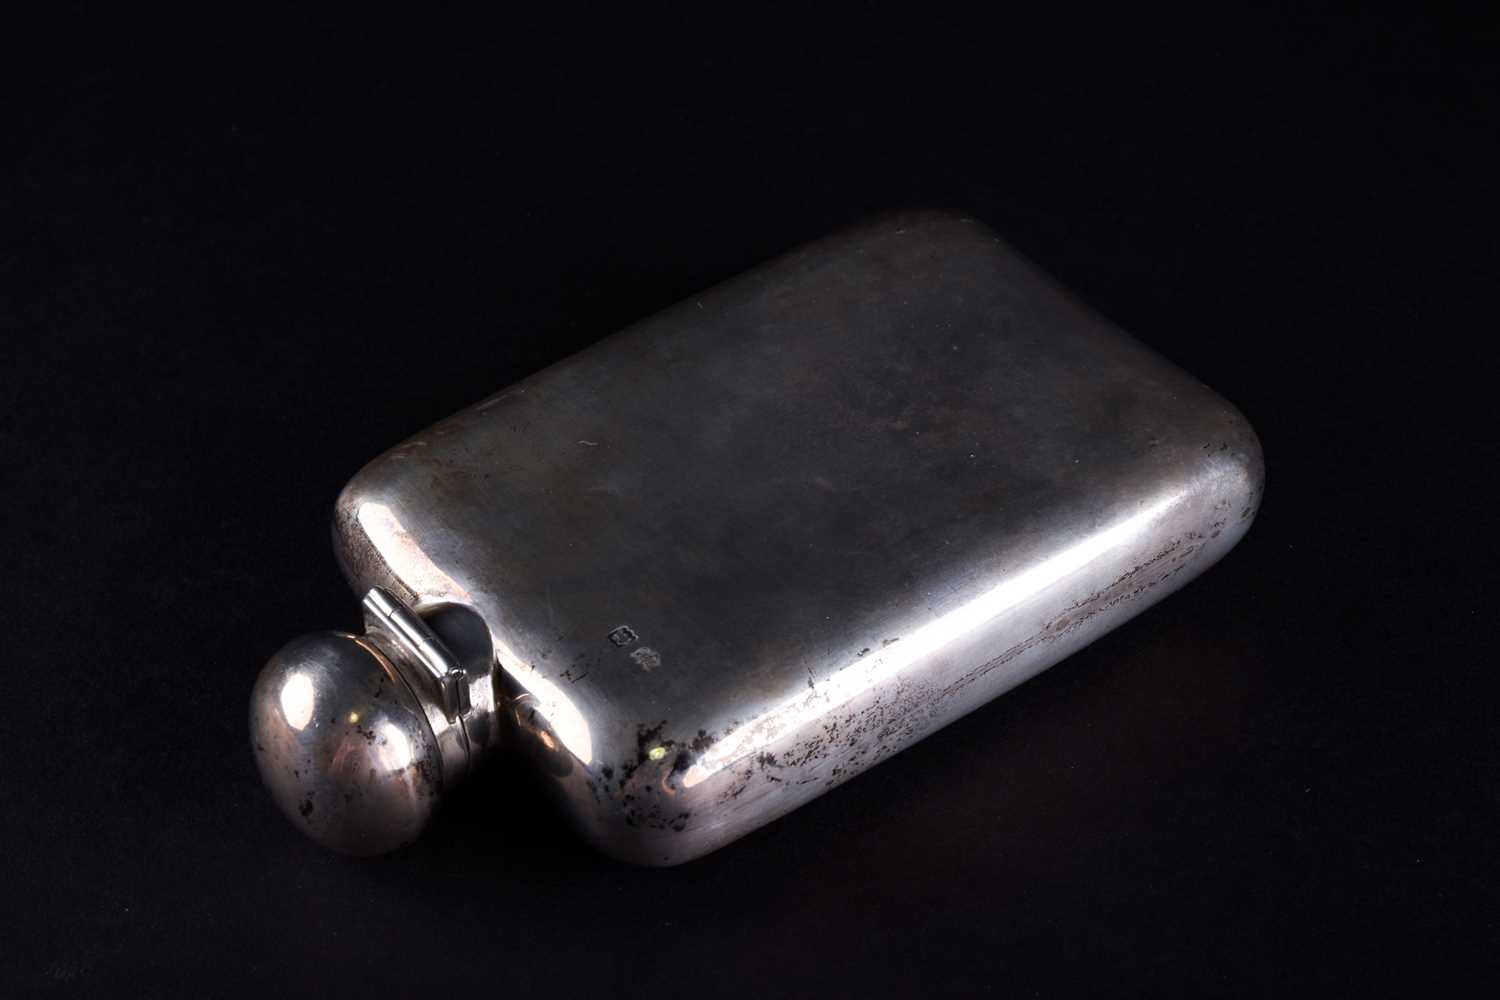 An Edwardian silver hip flask, Robert Pringle & Sons, London 1902, engraved with monogram IEH, 170g, - Image 6 of 6